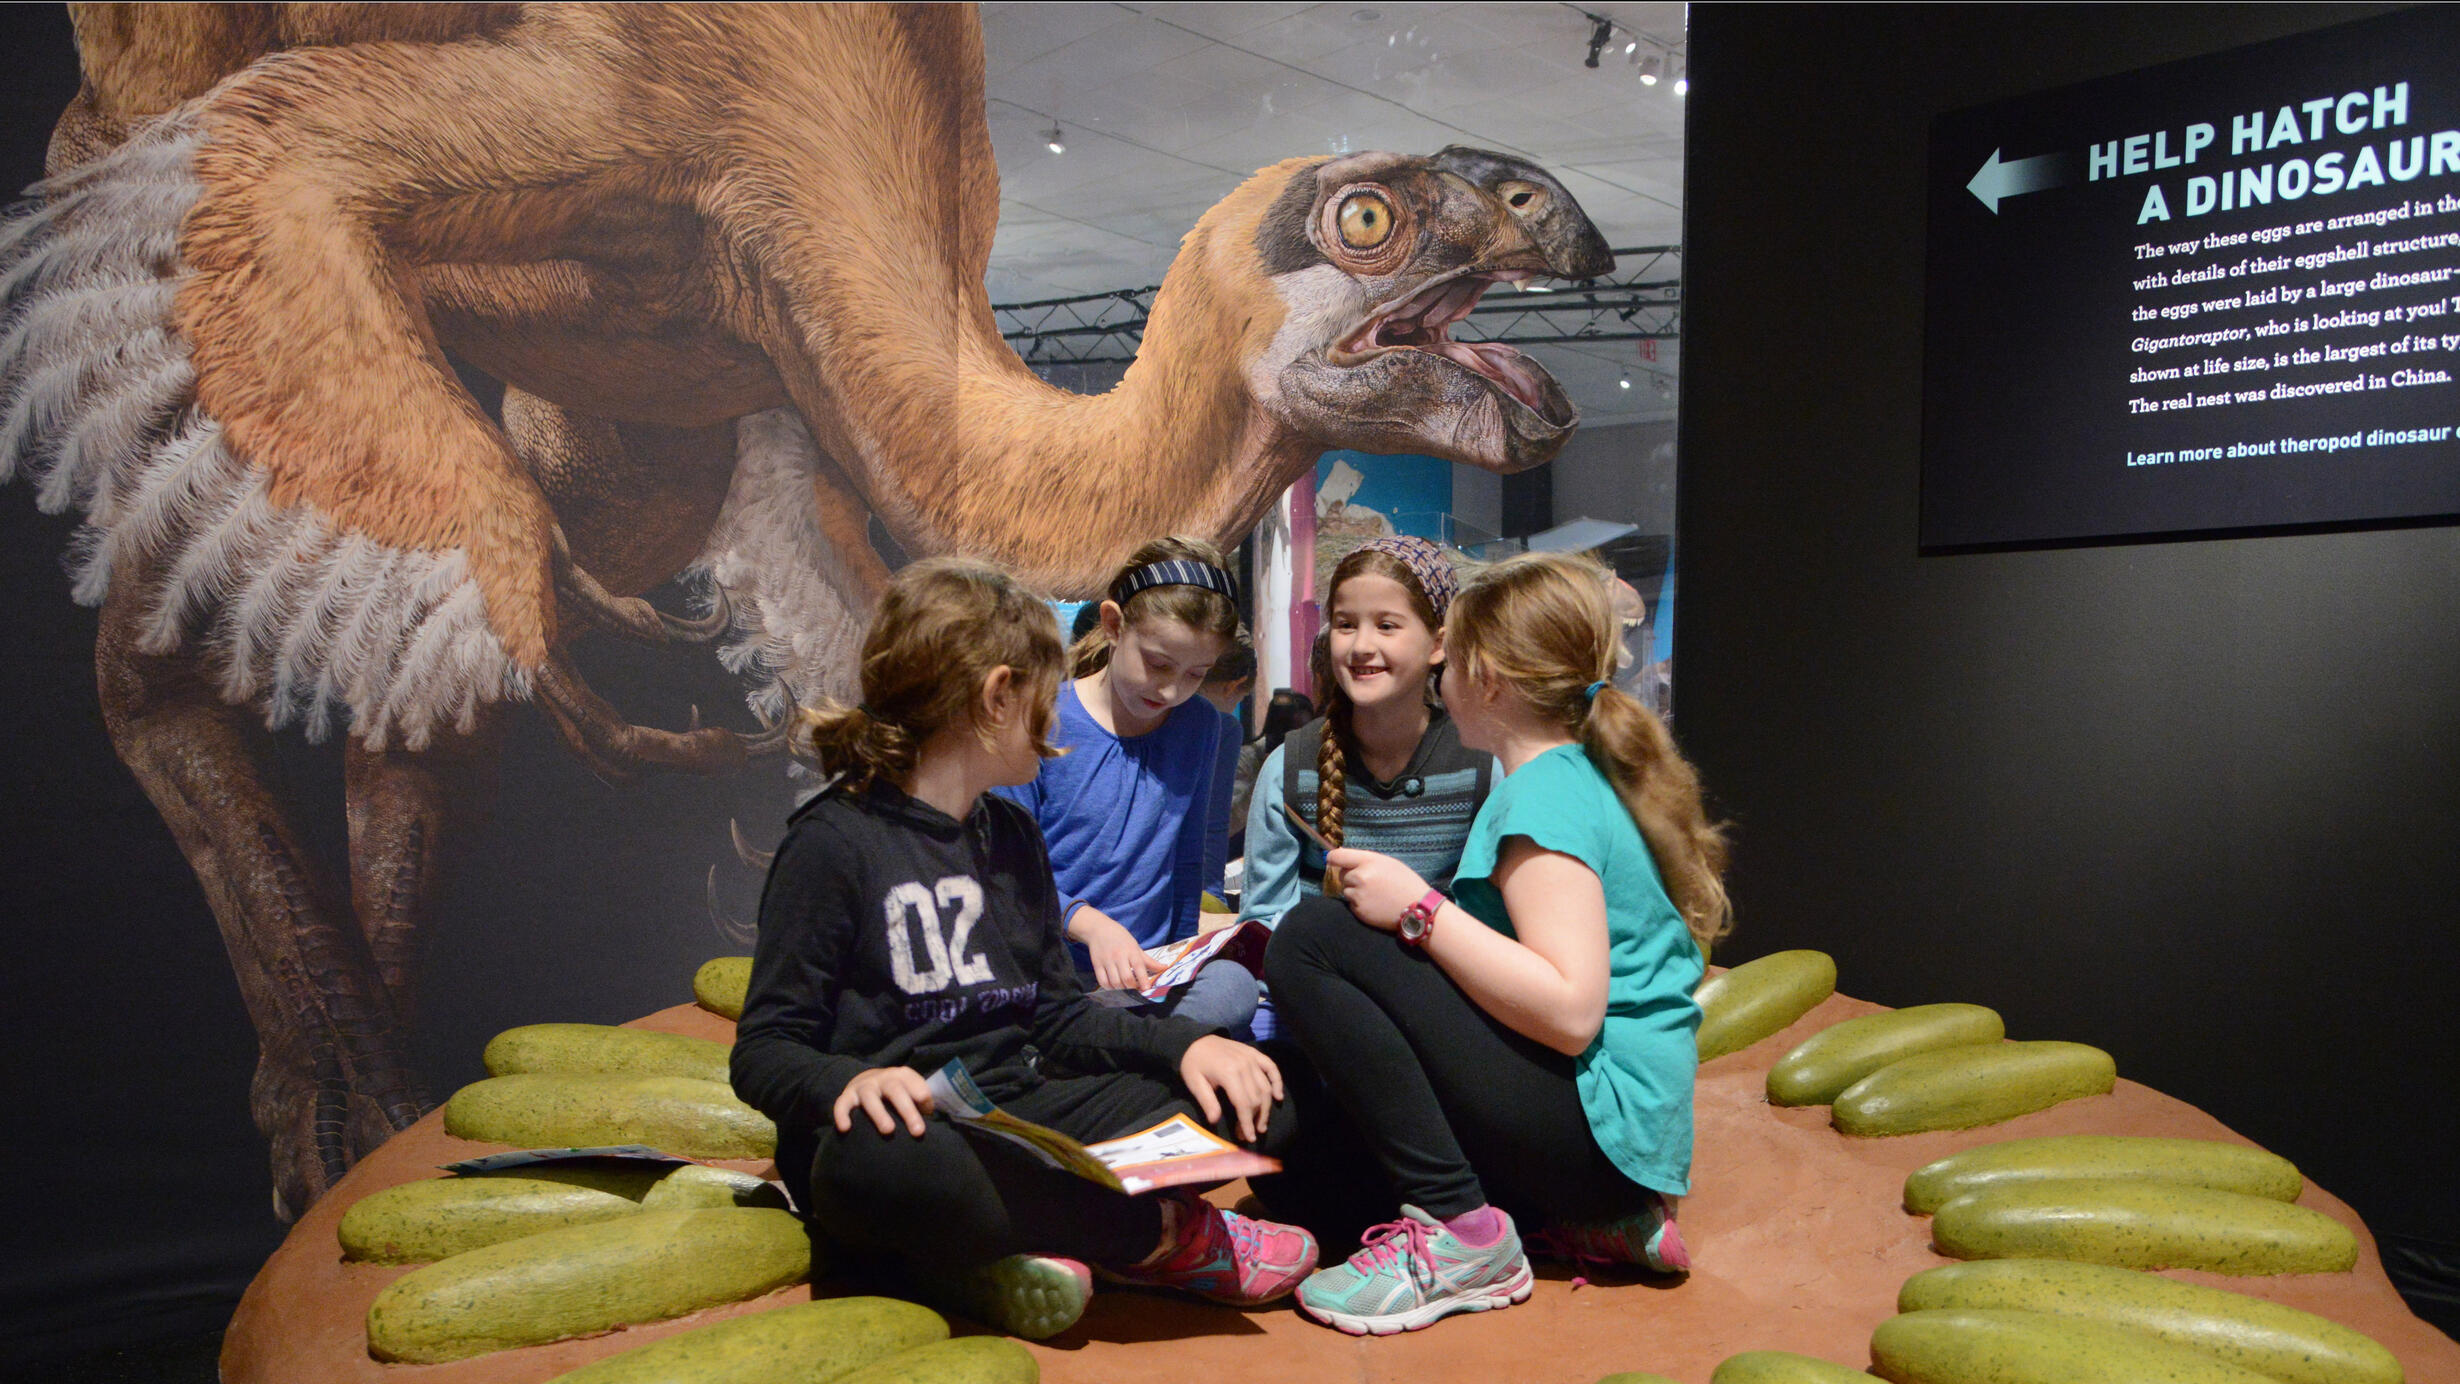 Four children sit at the center of a circle of life-size models of dinosaur eggs arranged in a circle.